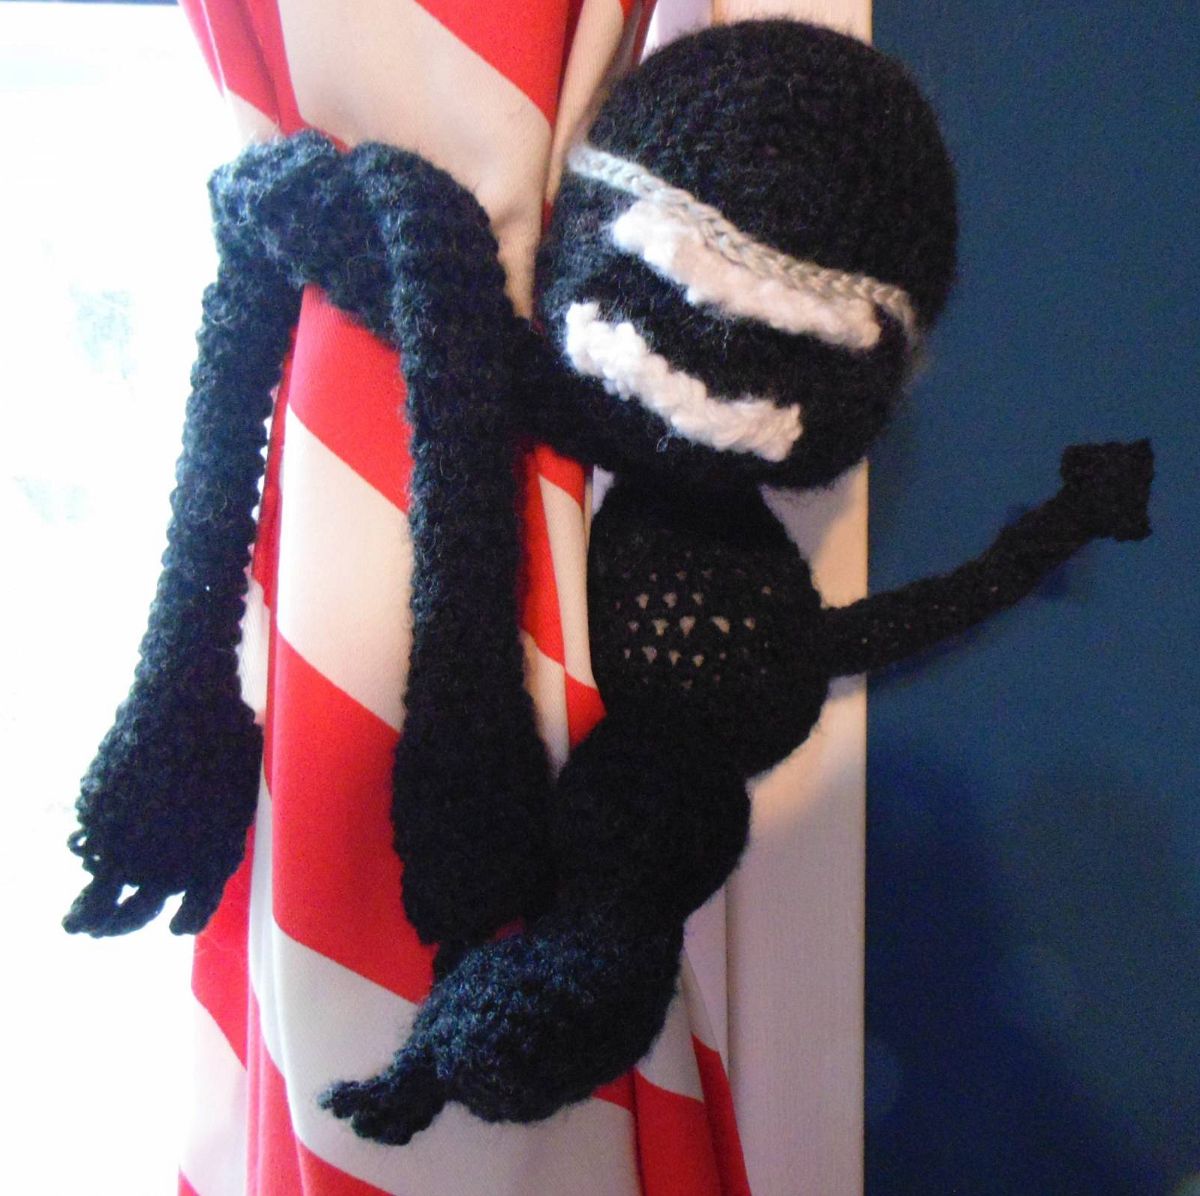 Crochet Alien Pattern Amigurumi Review for Cottontail and Whiskers by Joyce Lawrence